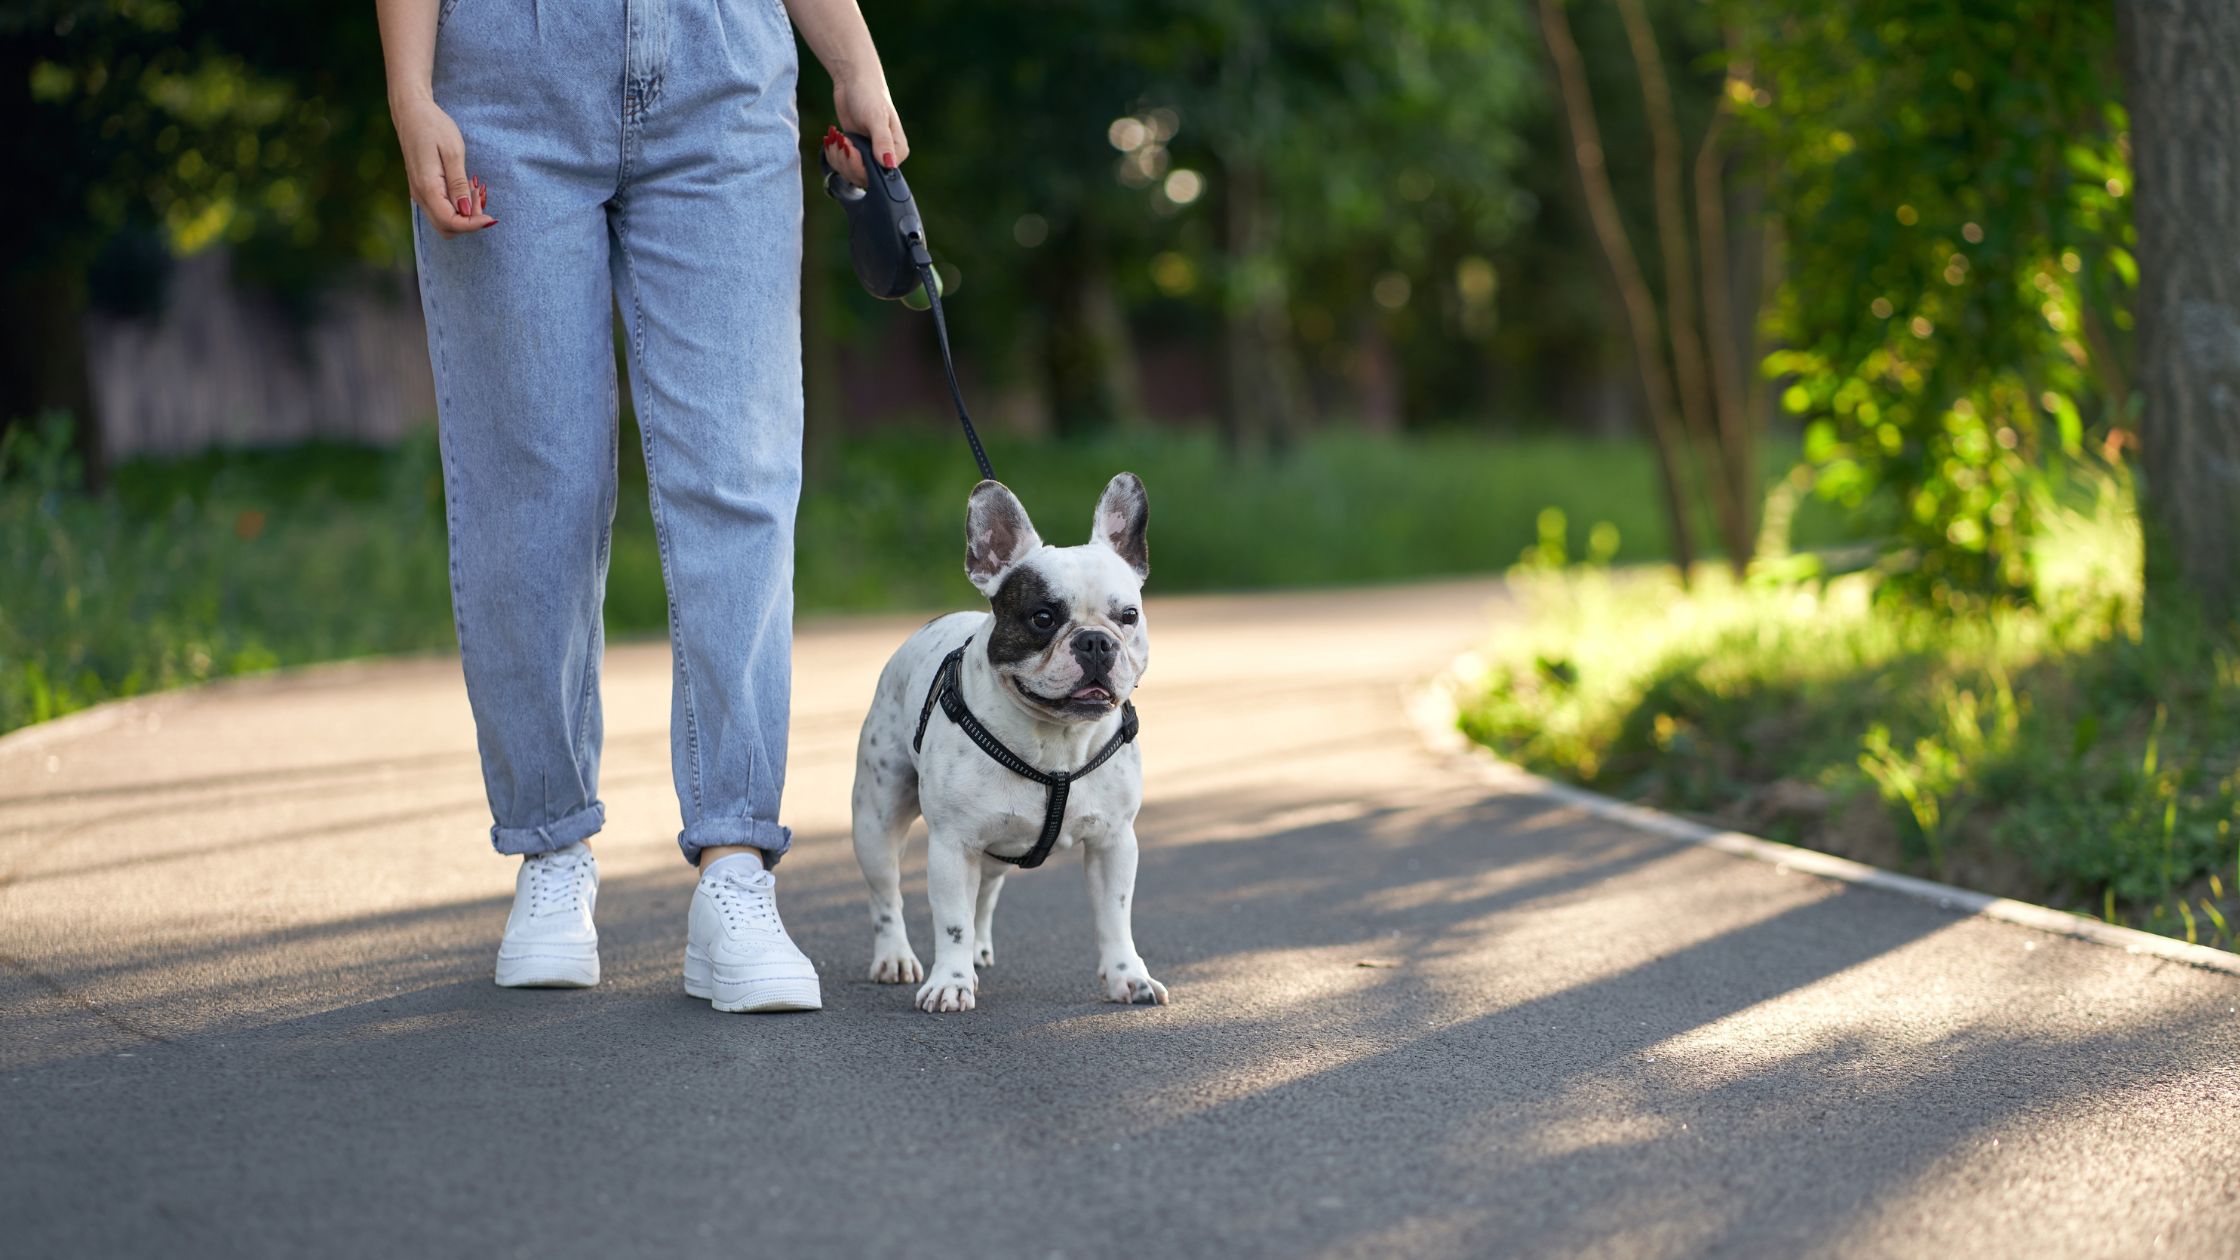 TRAIN YOUR DOG TO WALK WITH YOU